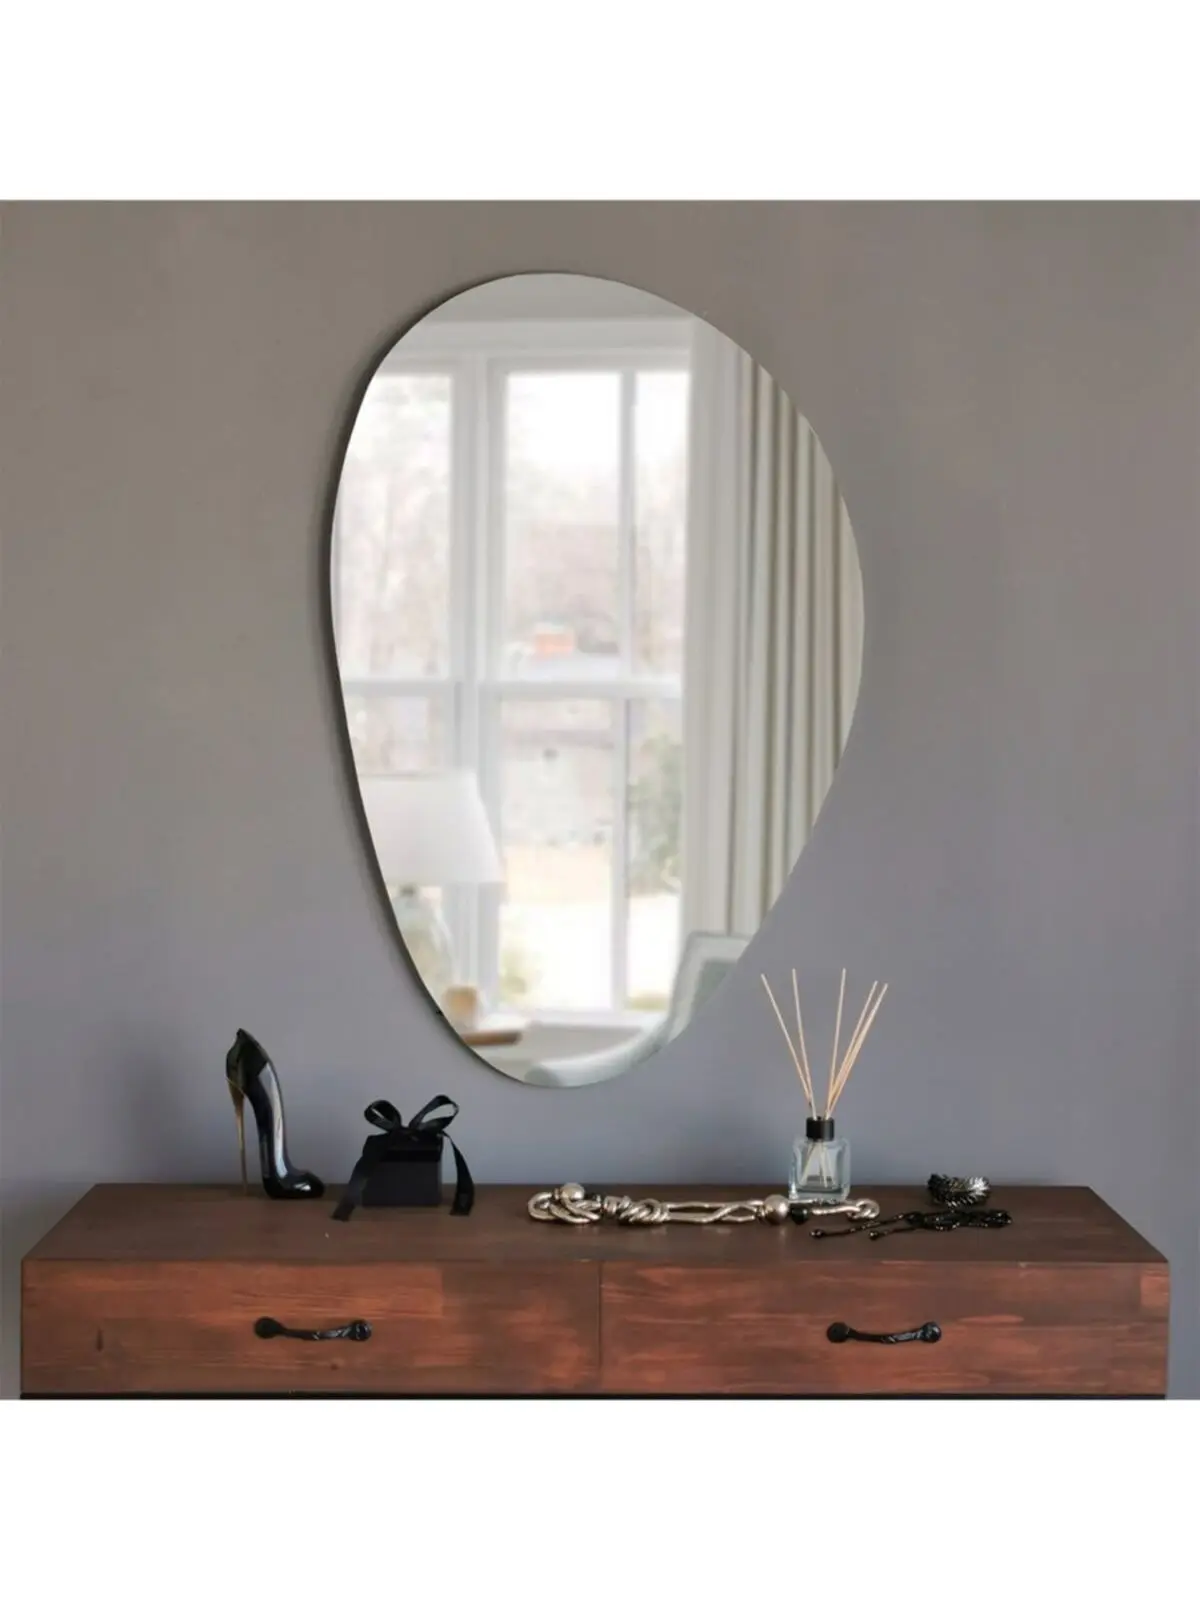 Asymmetric Decorative Wall Mirrors Console 90x60 cm Round Furniture Full Body Large Length Decor Bathroom Made In From Turkey images - 6